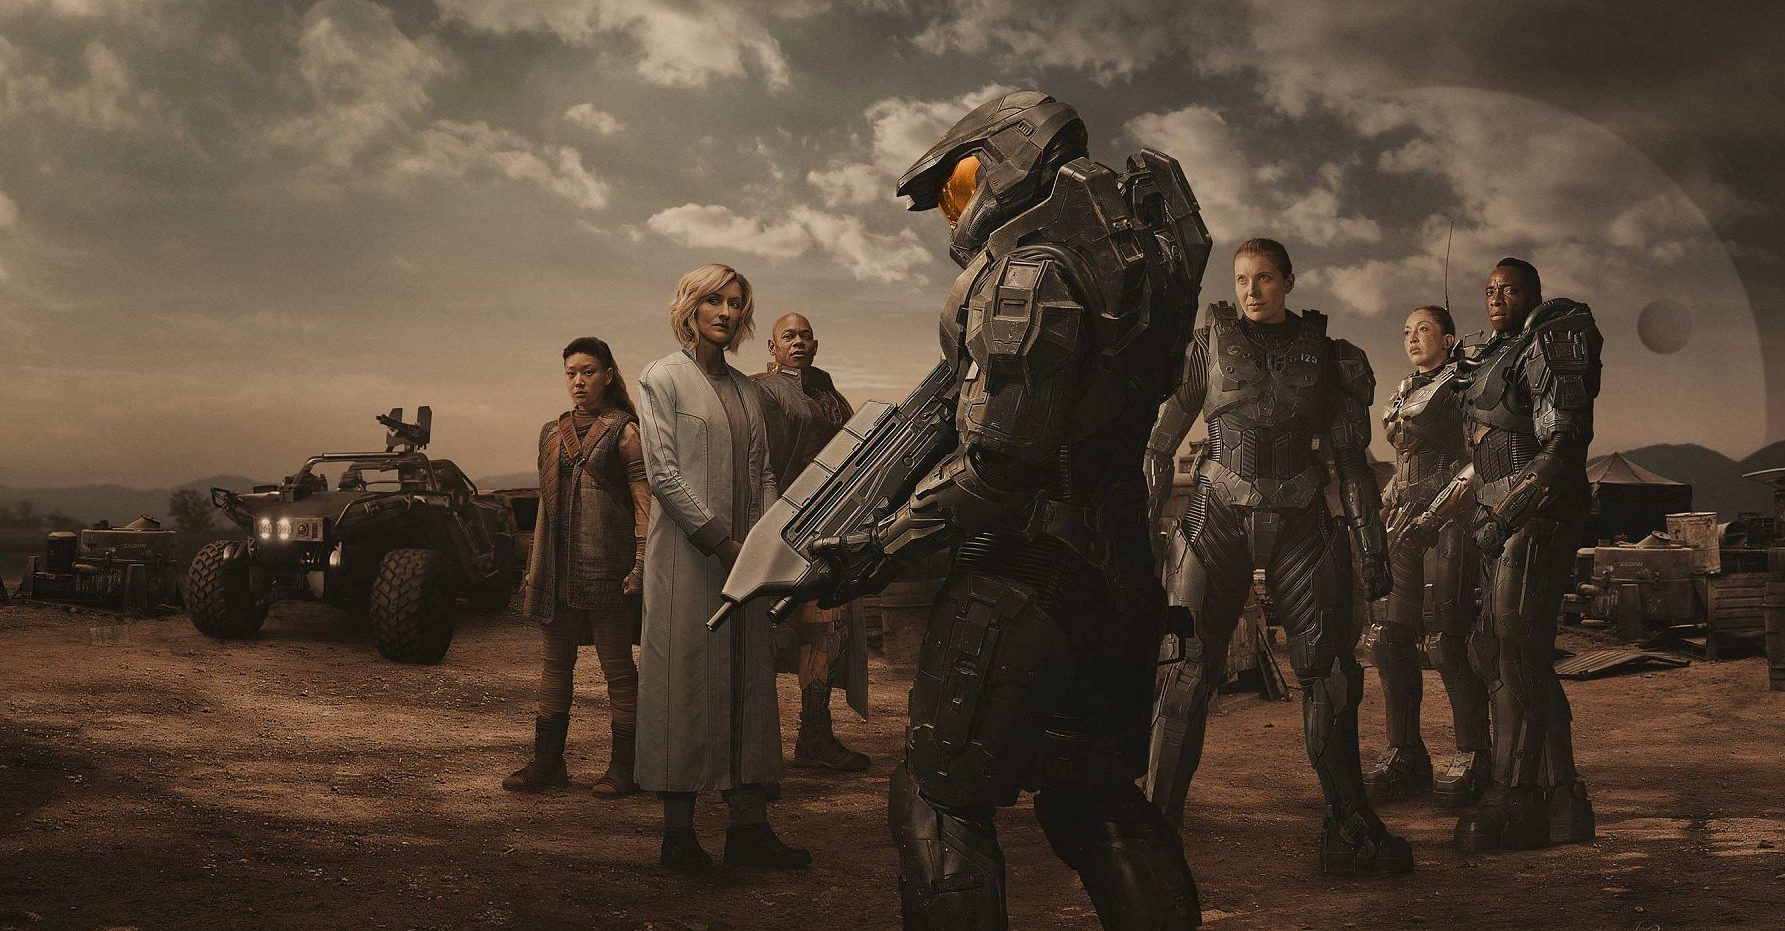 Is Halo on Netflix, HBO Max, Hulu, Disney+, or Prime?